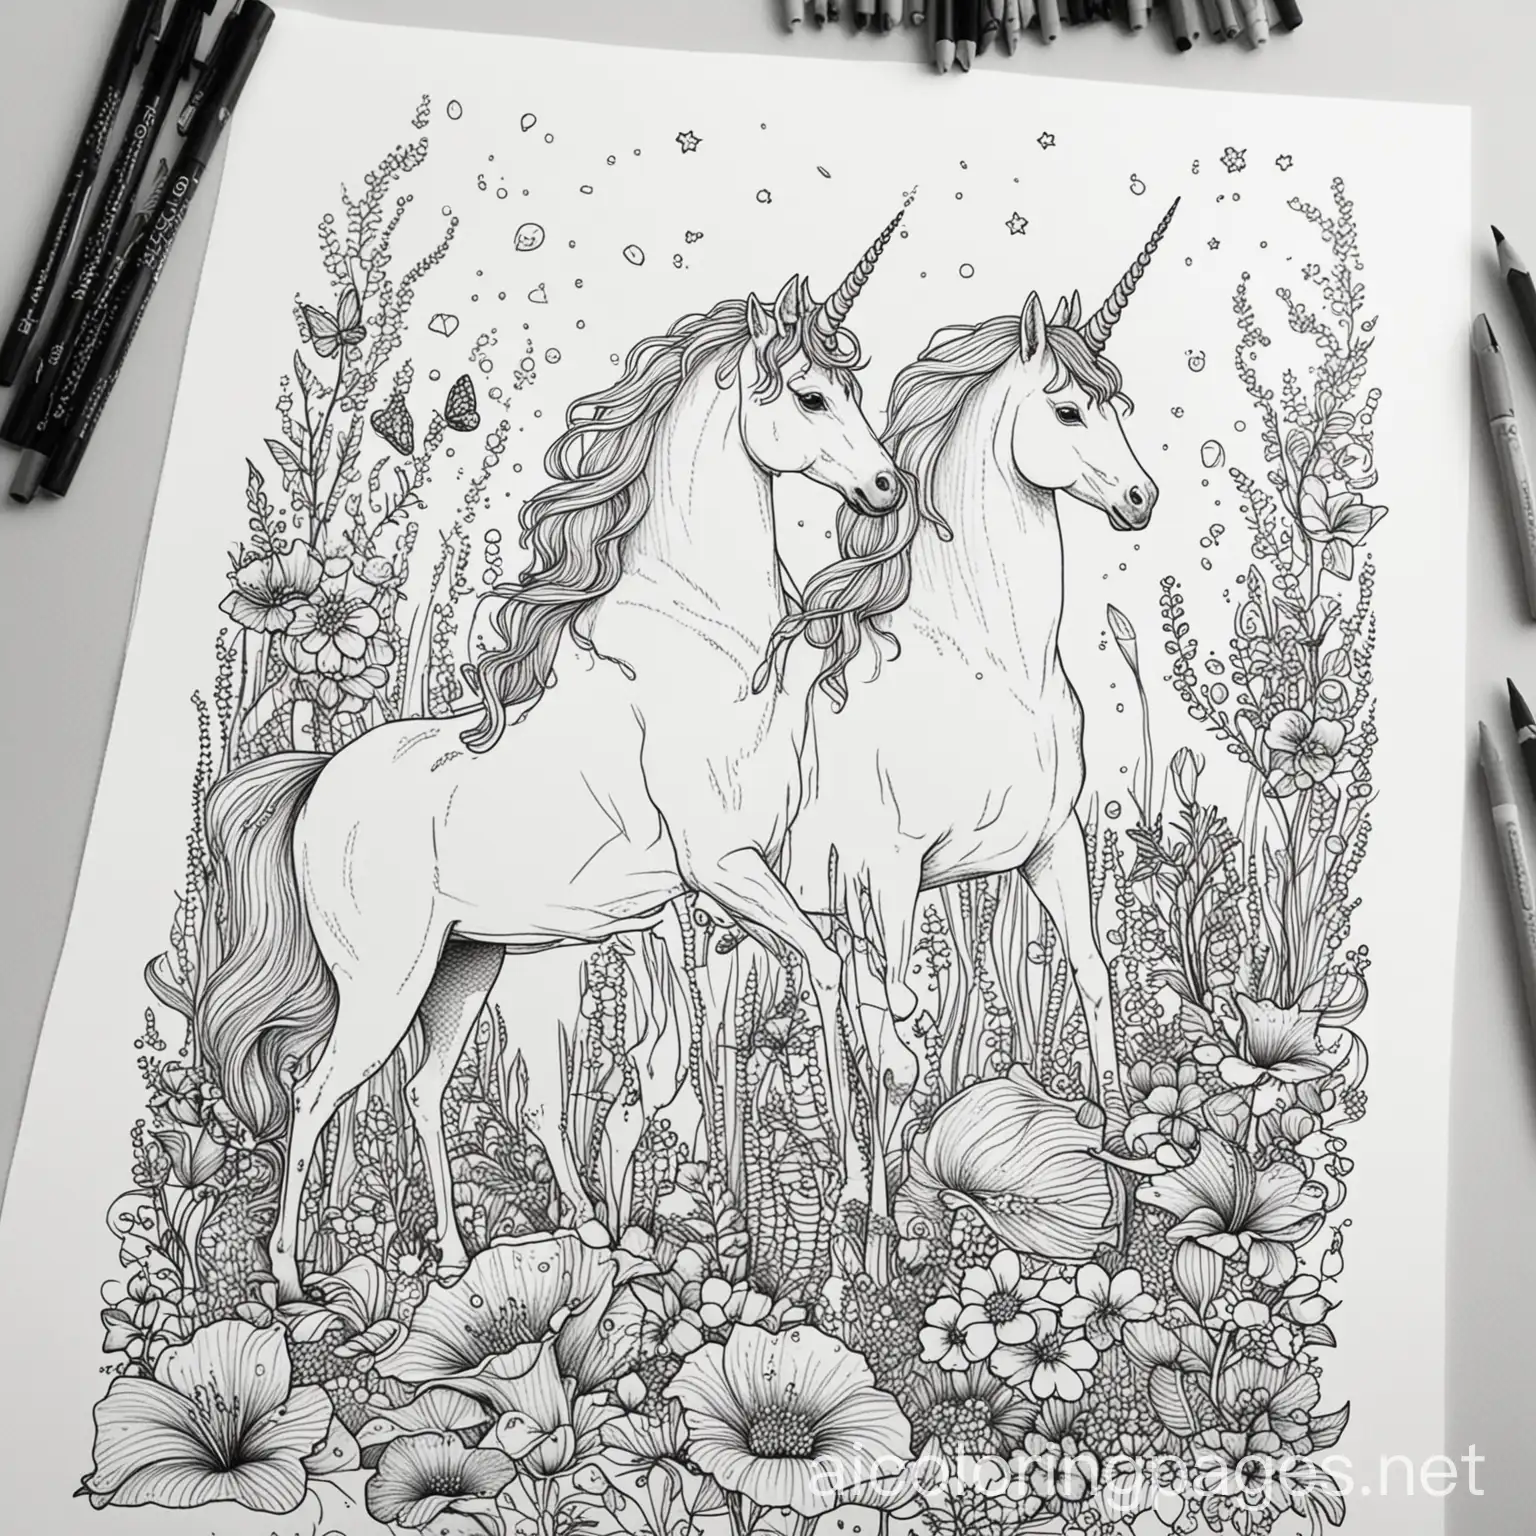 Unicorn-and-Mermaid-Coloring-Page-Black-and-White-Line-Art